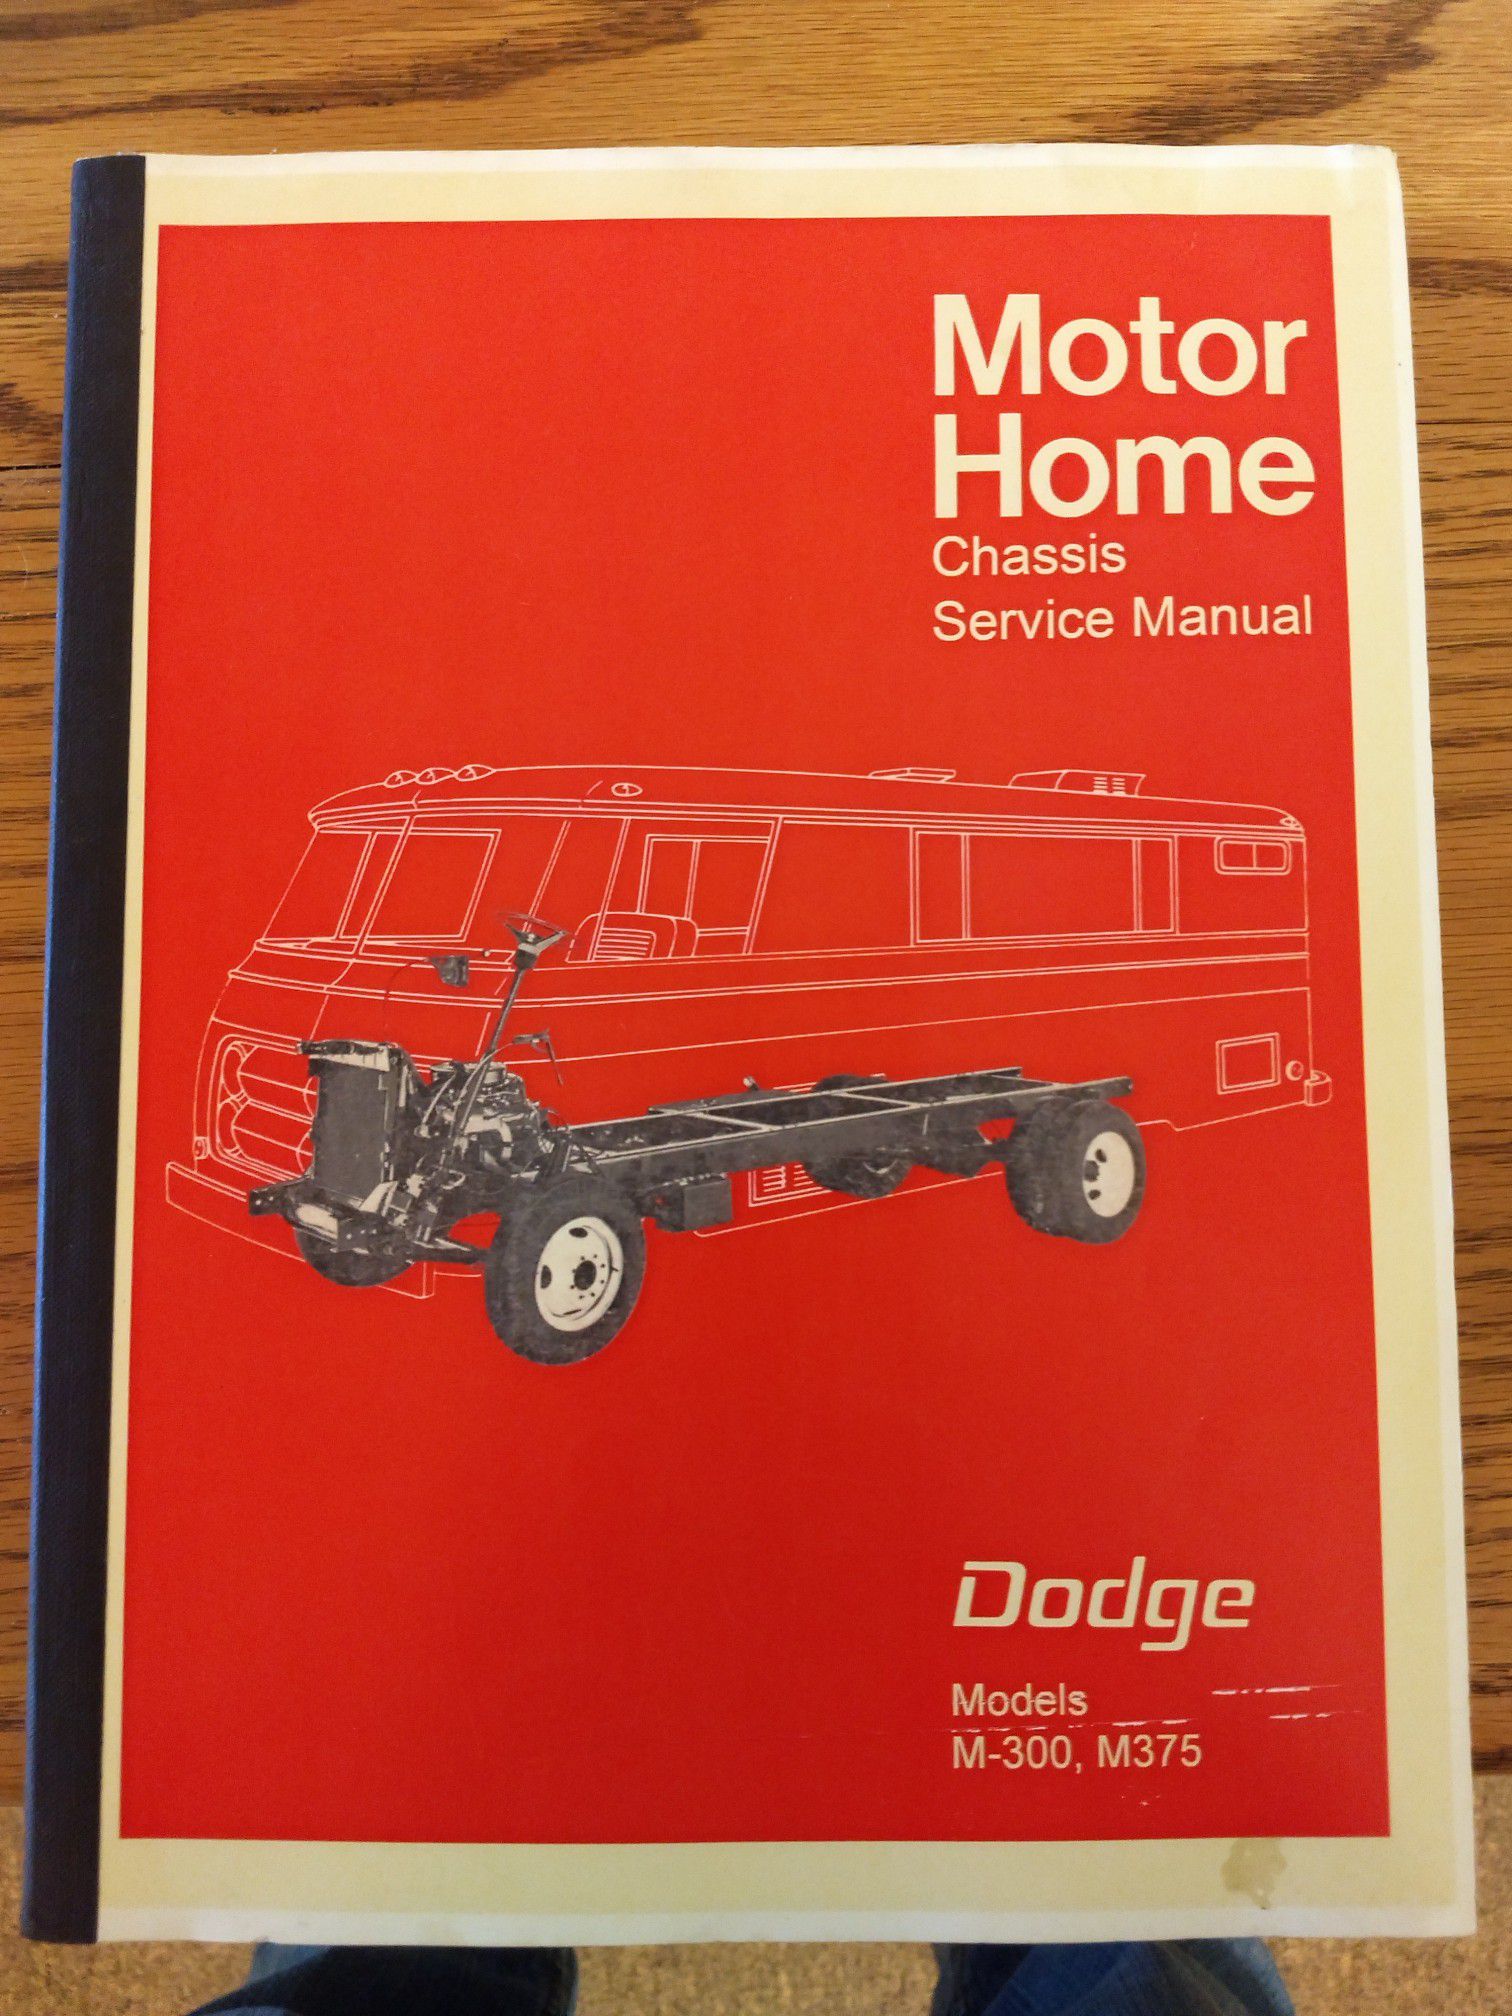 Dodge motorhome chassis service manual